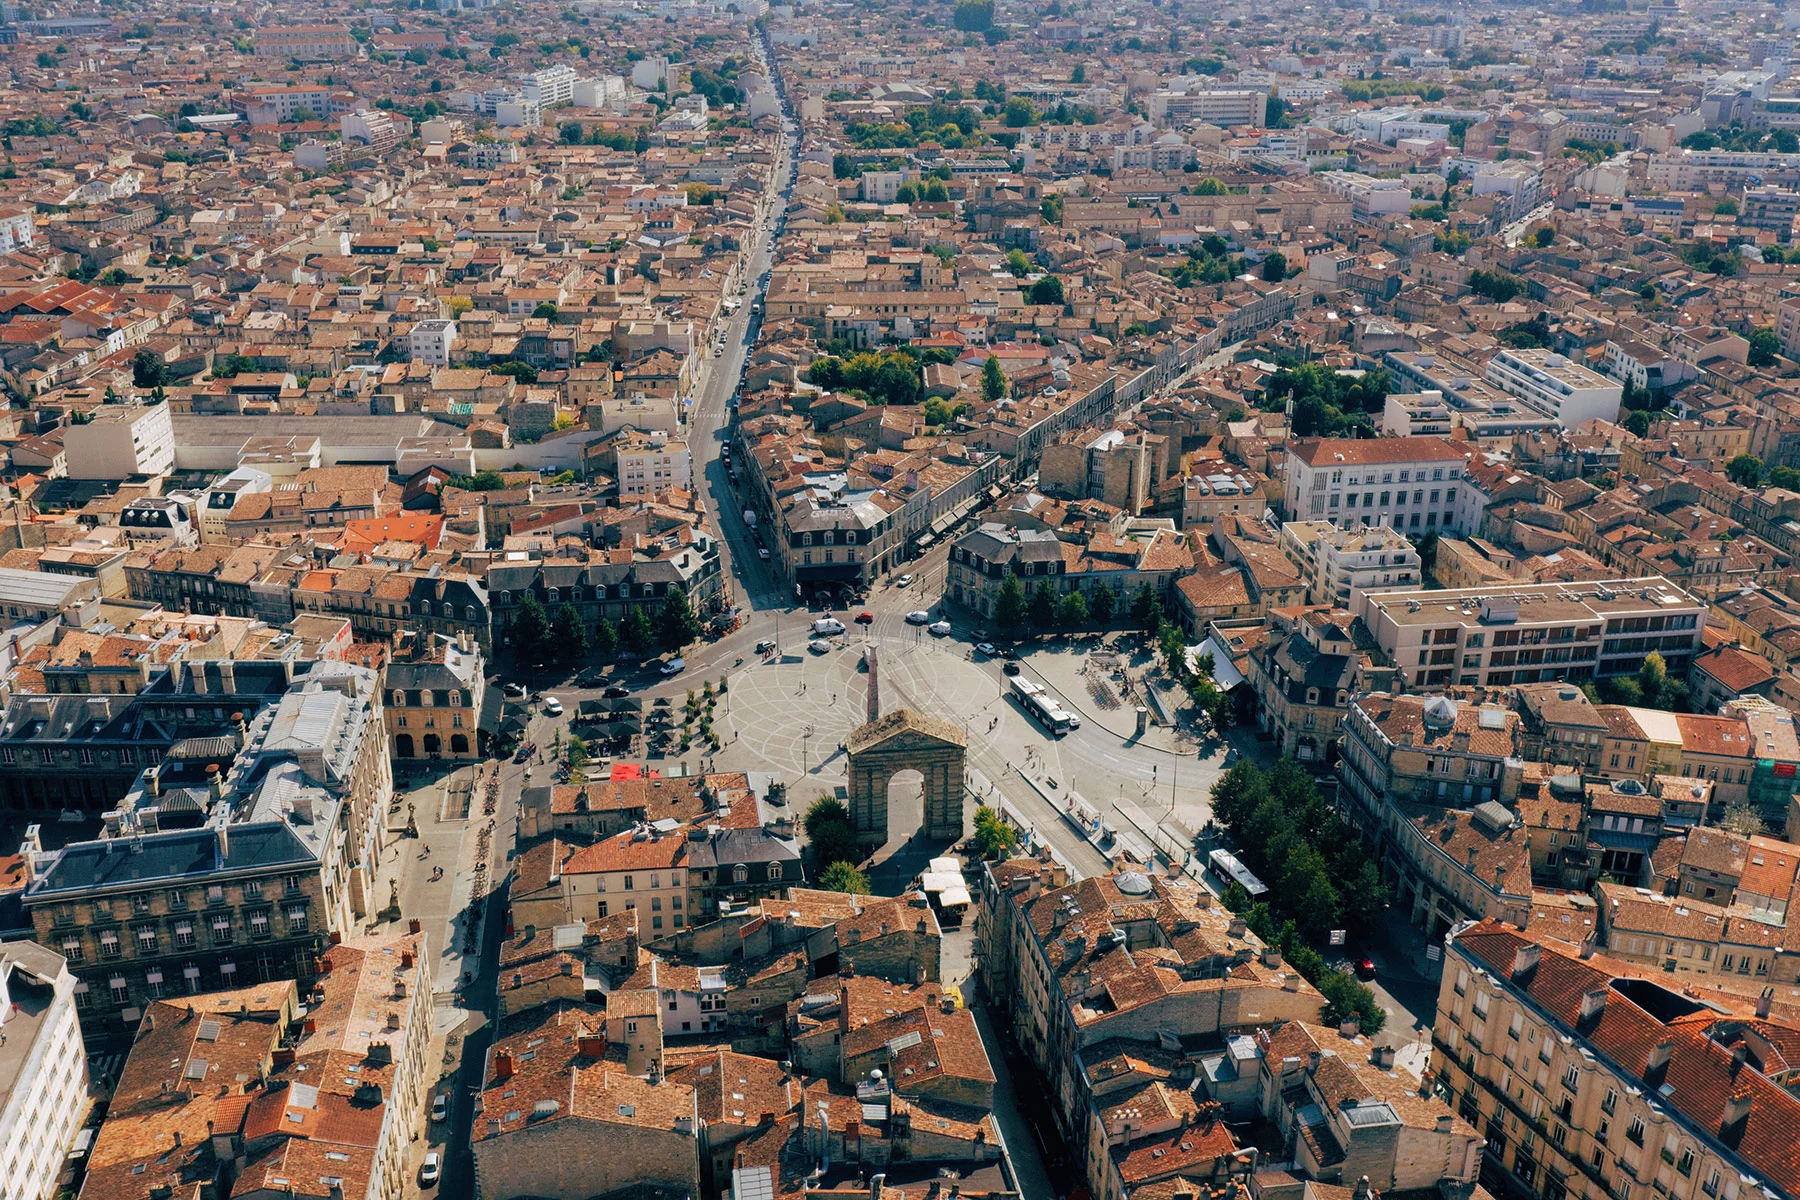 An aerial view of Bordeaux showing red-tiled roofs